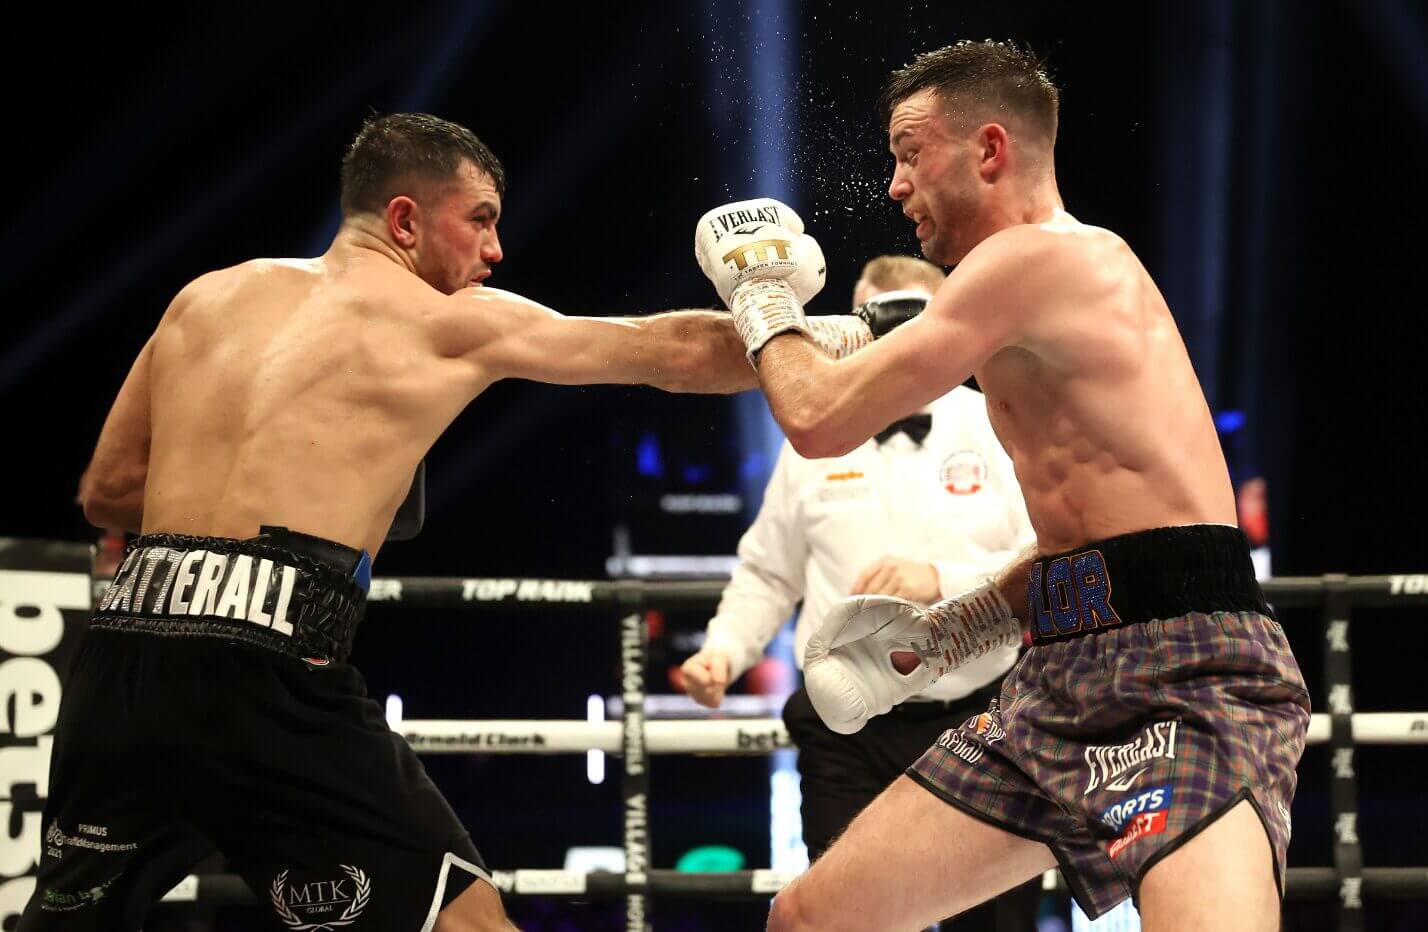 Josh Taylor and Jack Catterall will settle their rivalry on May 25